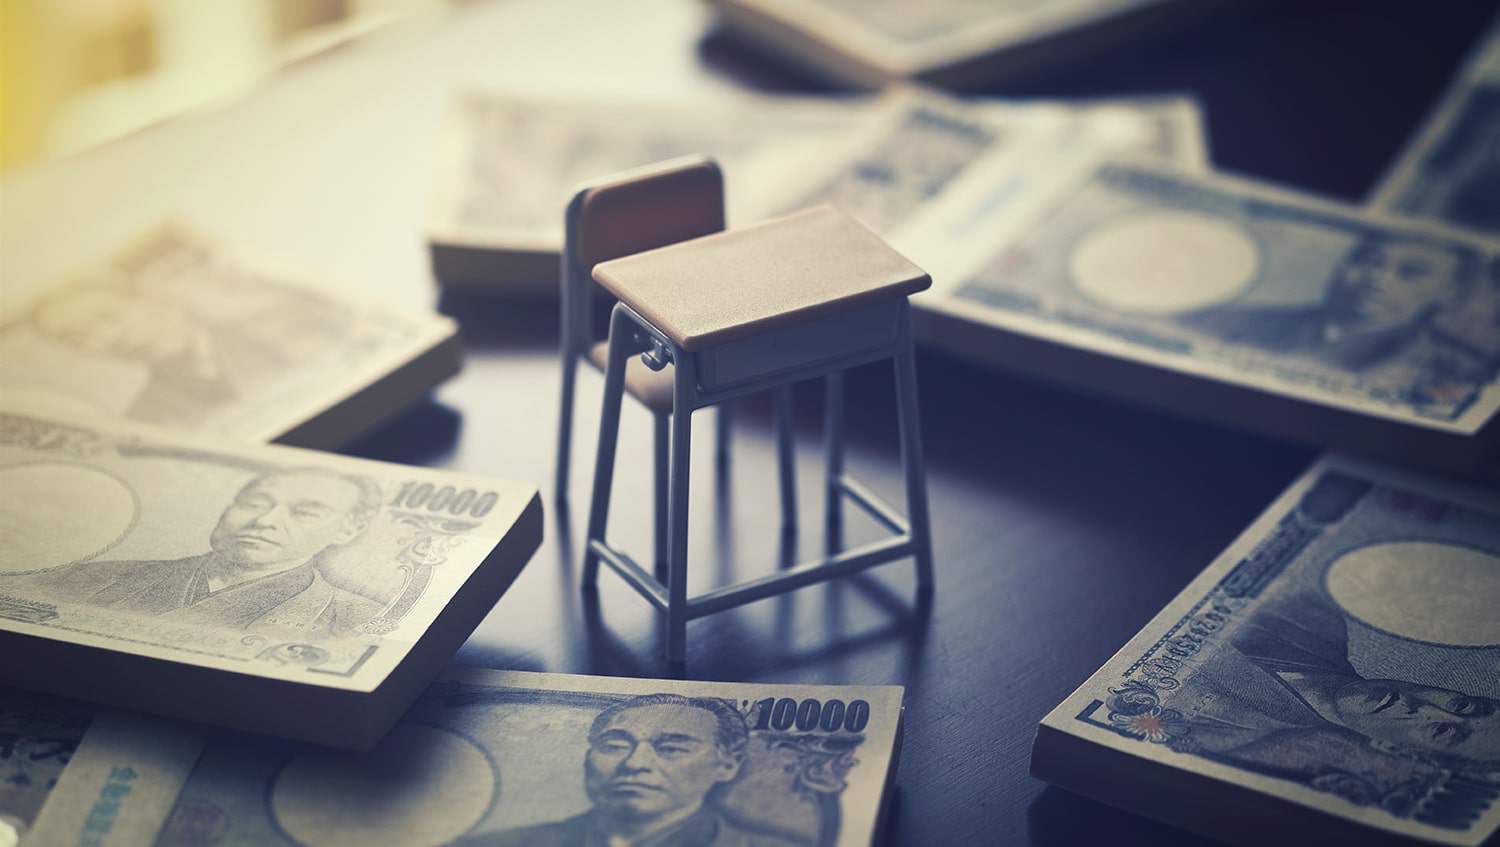 Japanese School desk surrounded by stacks of 10,000 yen notes